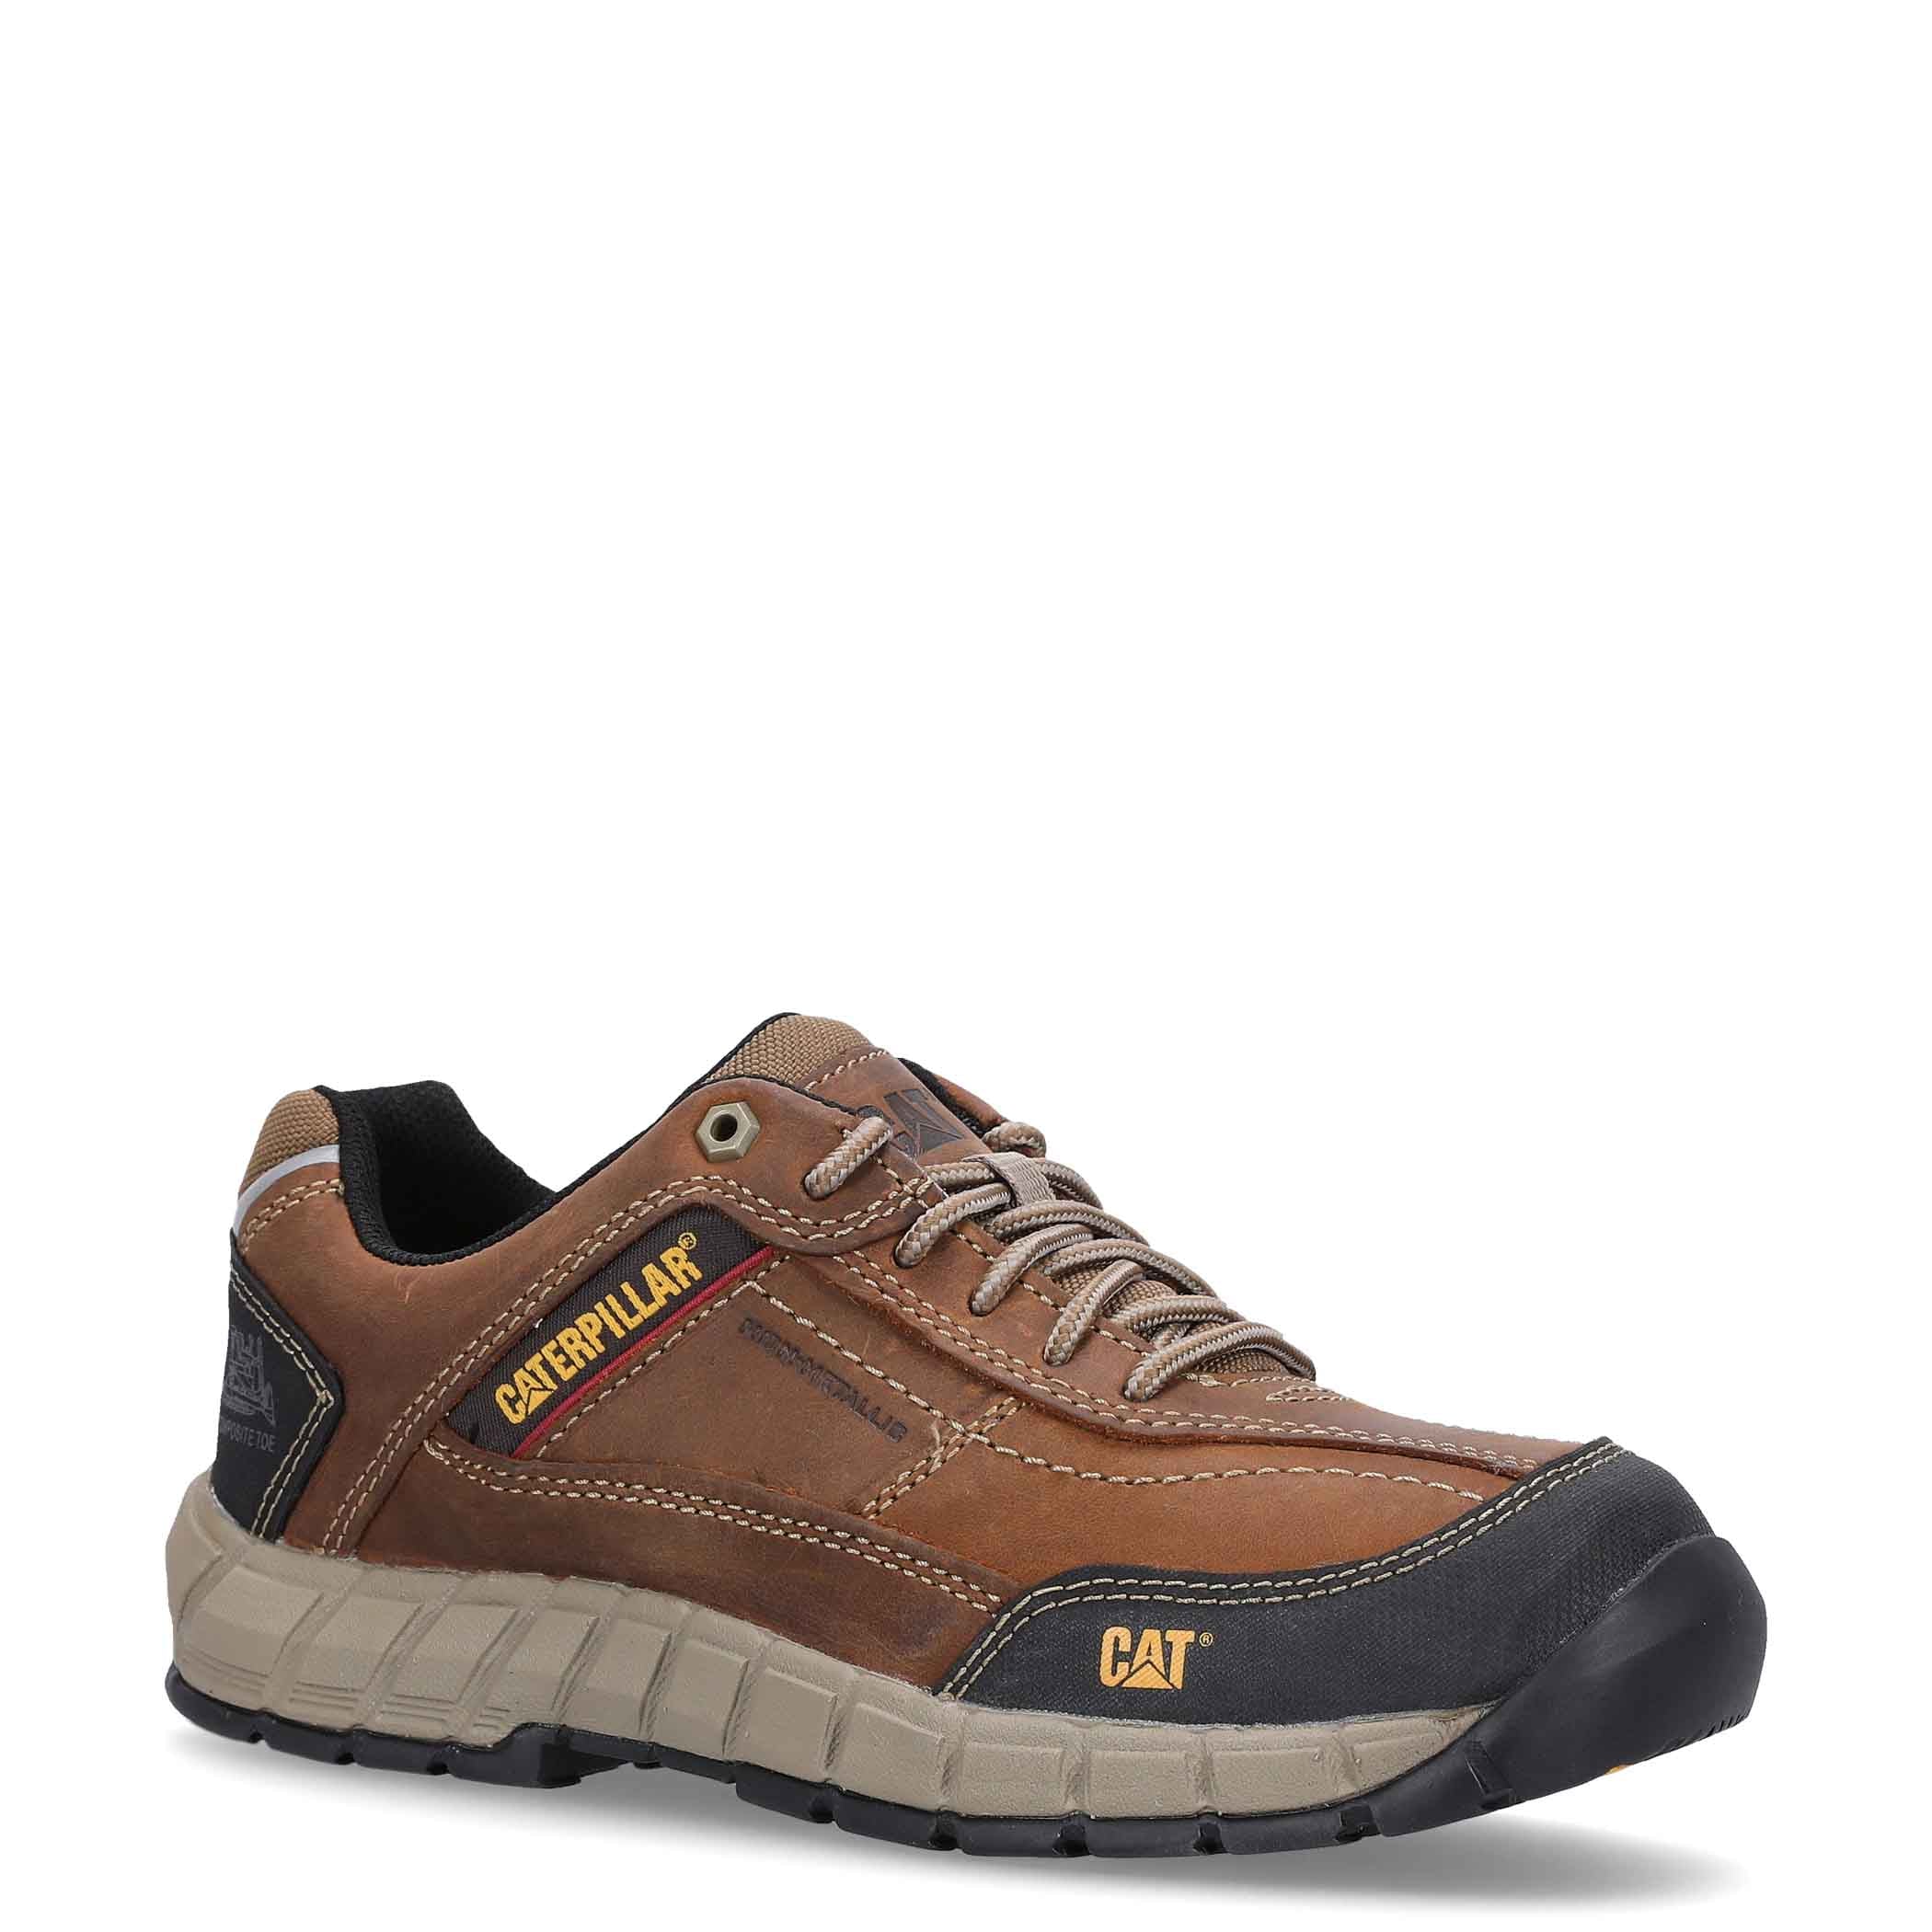 TENIS STREAMLINE LEATHER INDUSTRIAL COLOR CAFE PARA HOMBRE